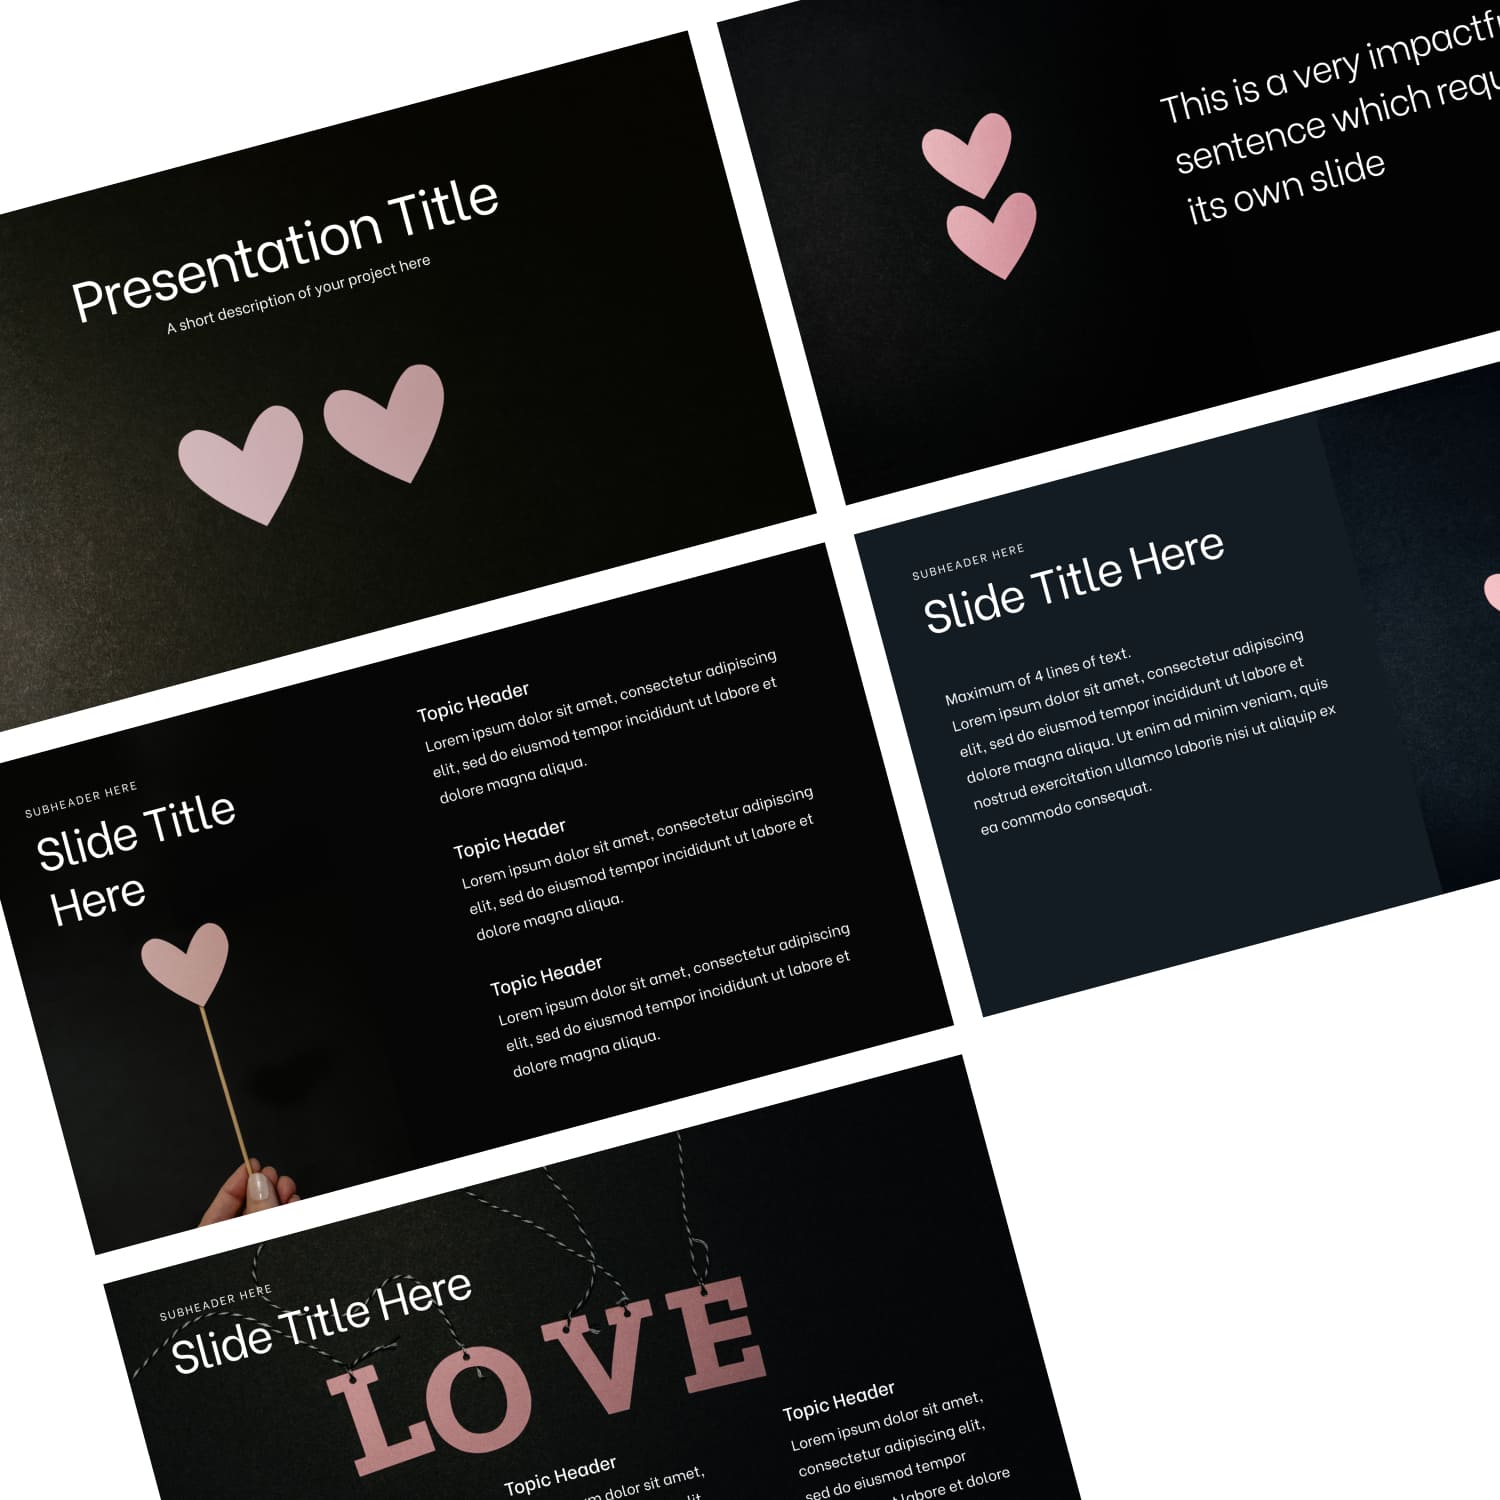 Preview Valentines Day Powerpoint Template.